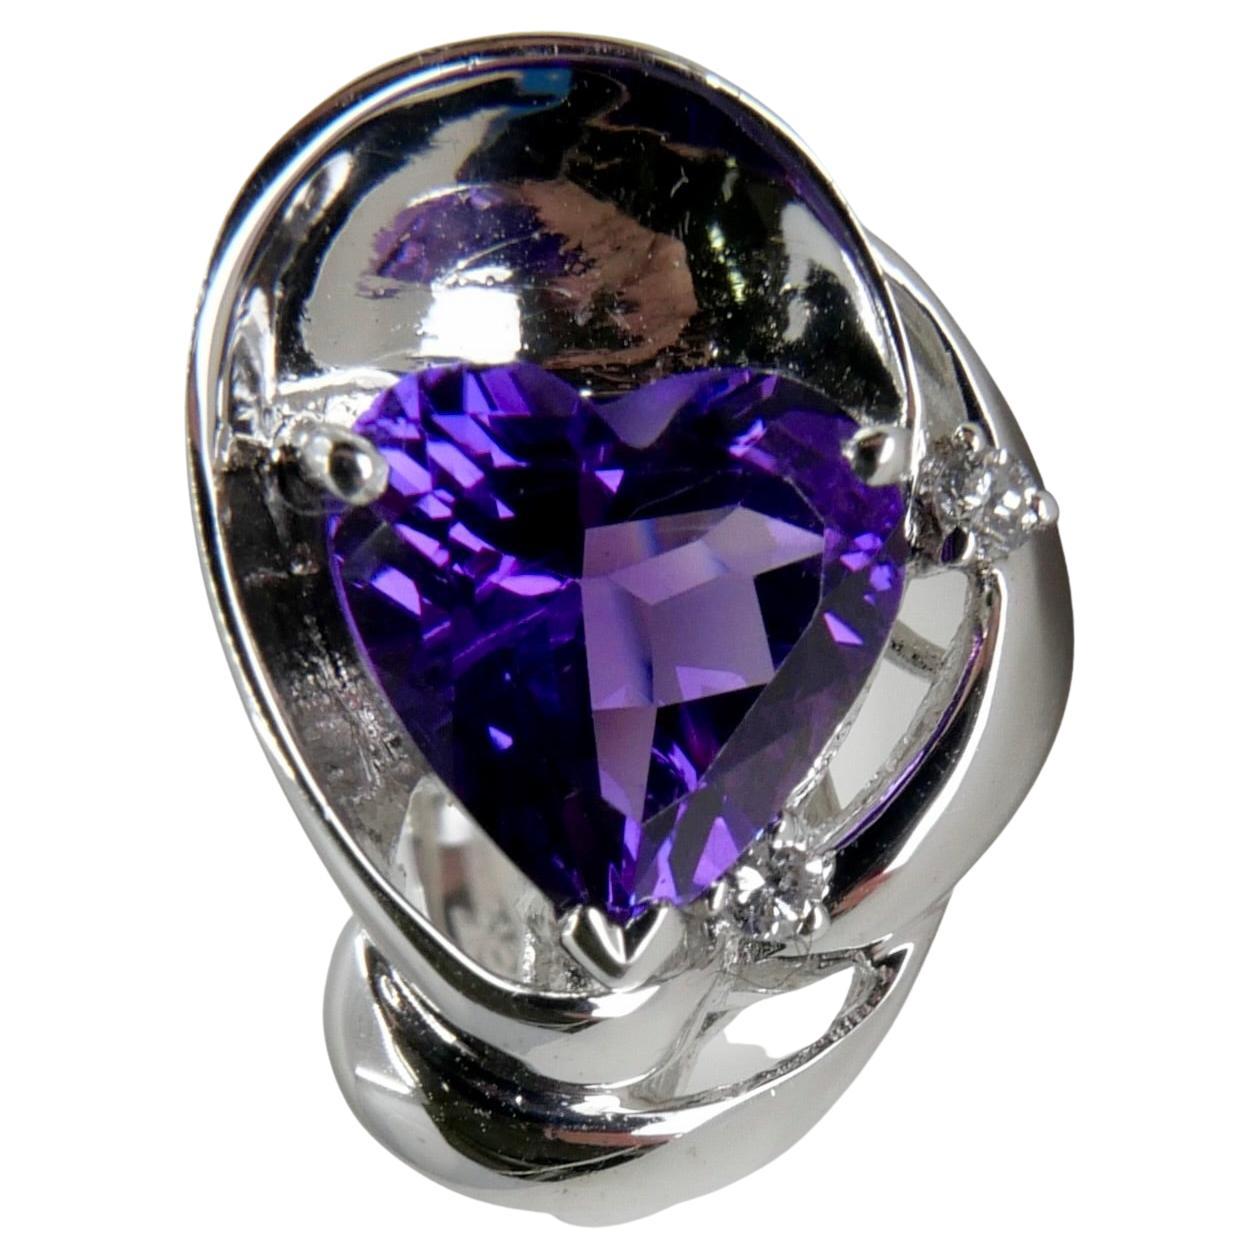 Amazon.com: PEORA Amethyst Heart Promise Ring for Women 925 Sterling  Silver, Natural Gemstone Birthstone, 1 Carat Heart Shape 7mm, Size 5 :  Peora: Clothing, Shoes & Jewelry